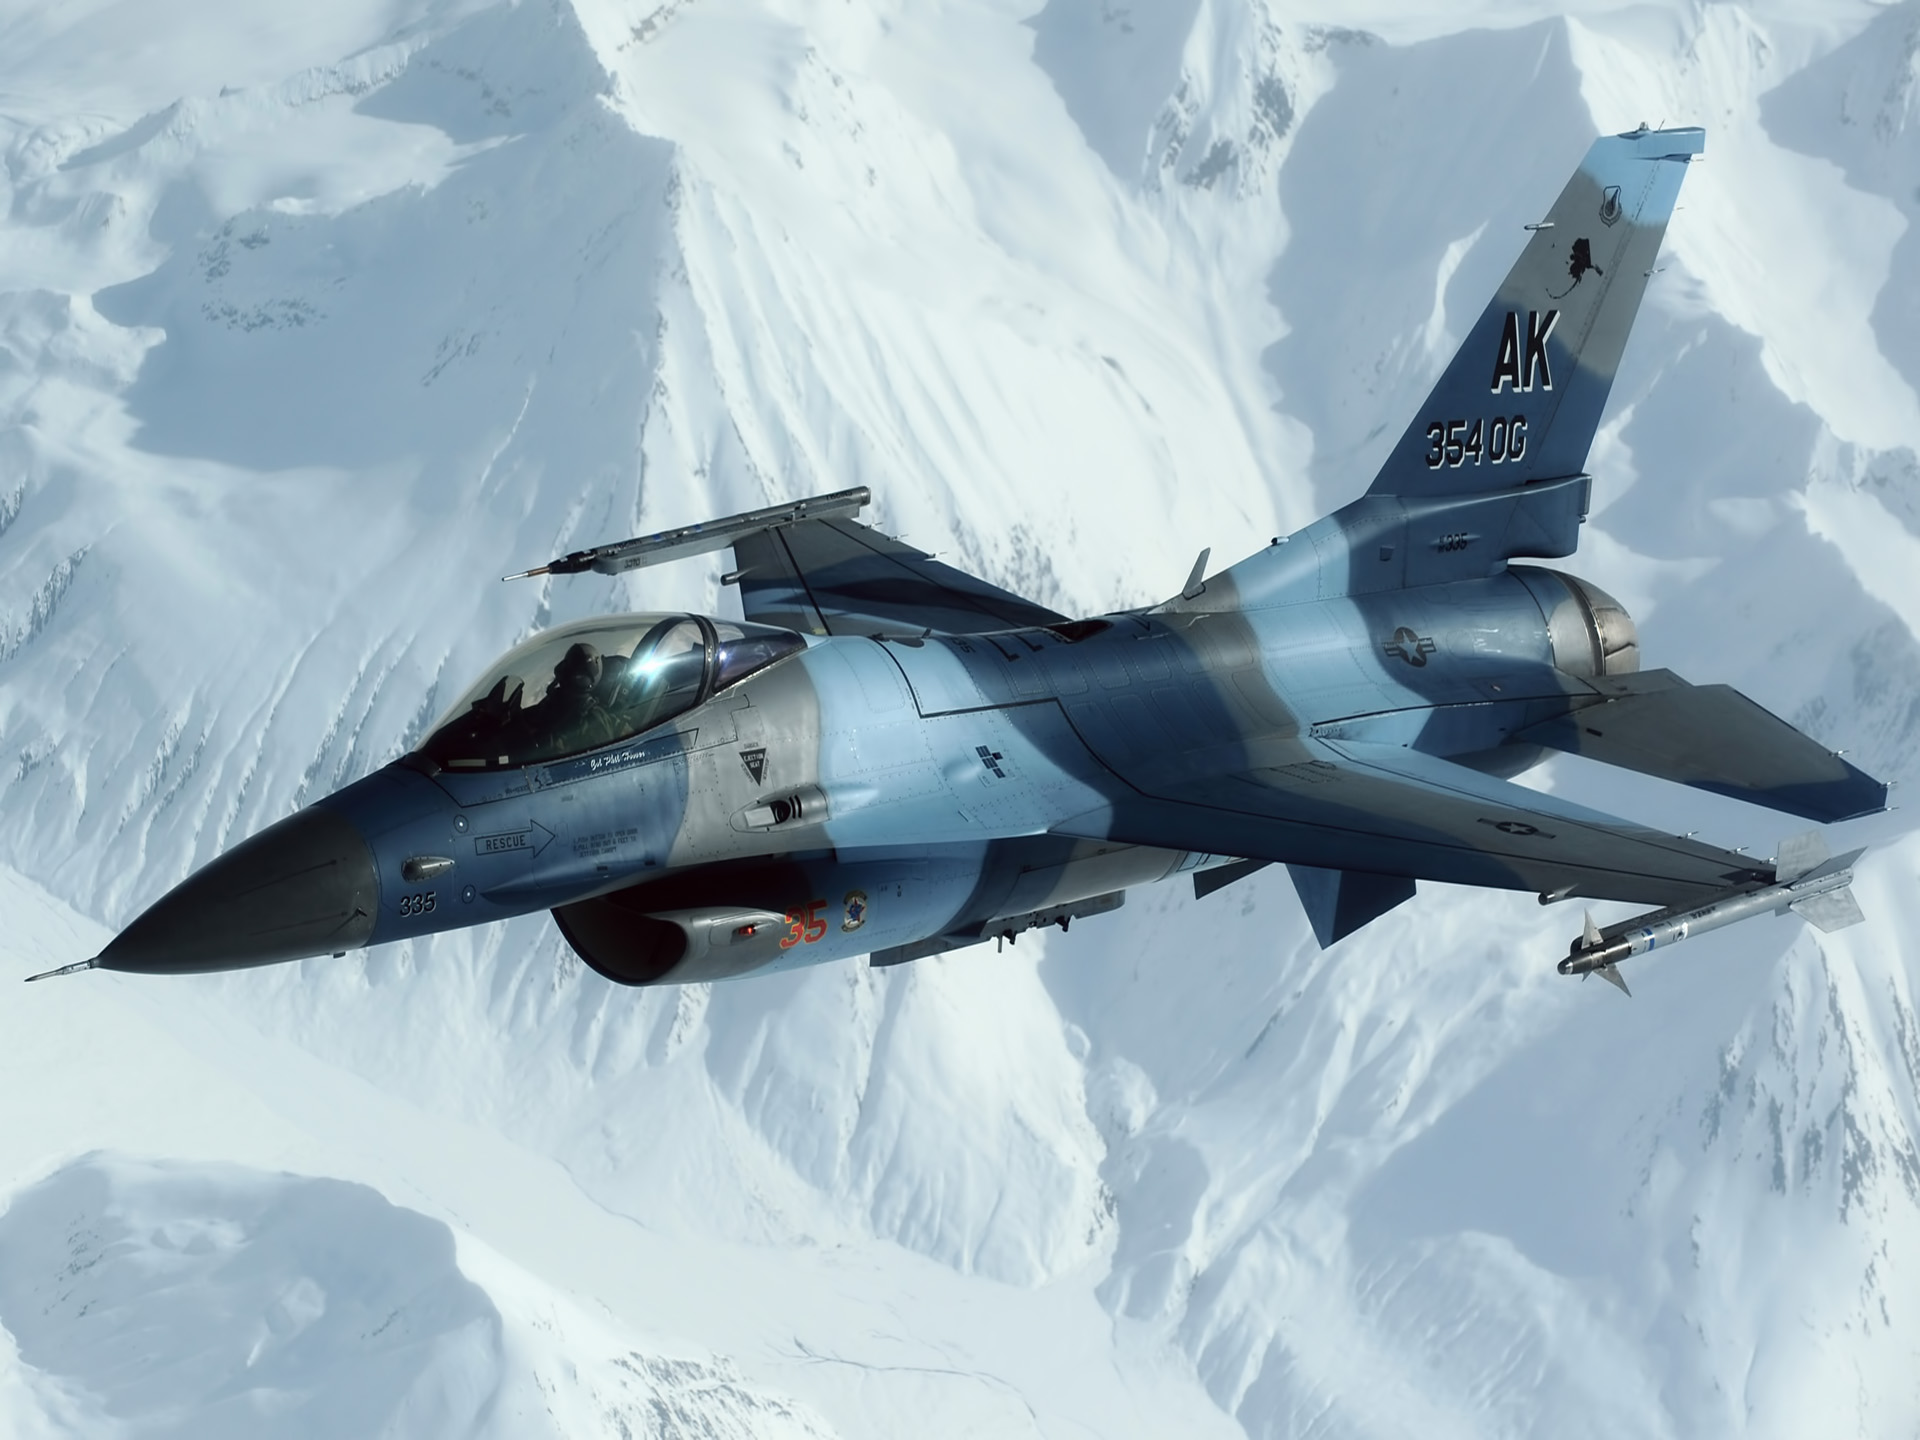 Download High quality over the snow-capped mountains Military Airplanes wallpaper / 1920x1440